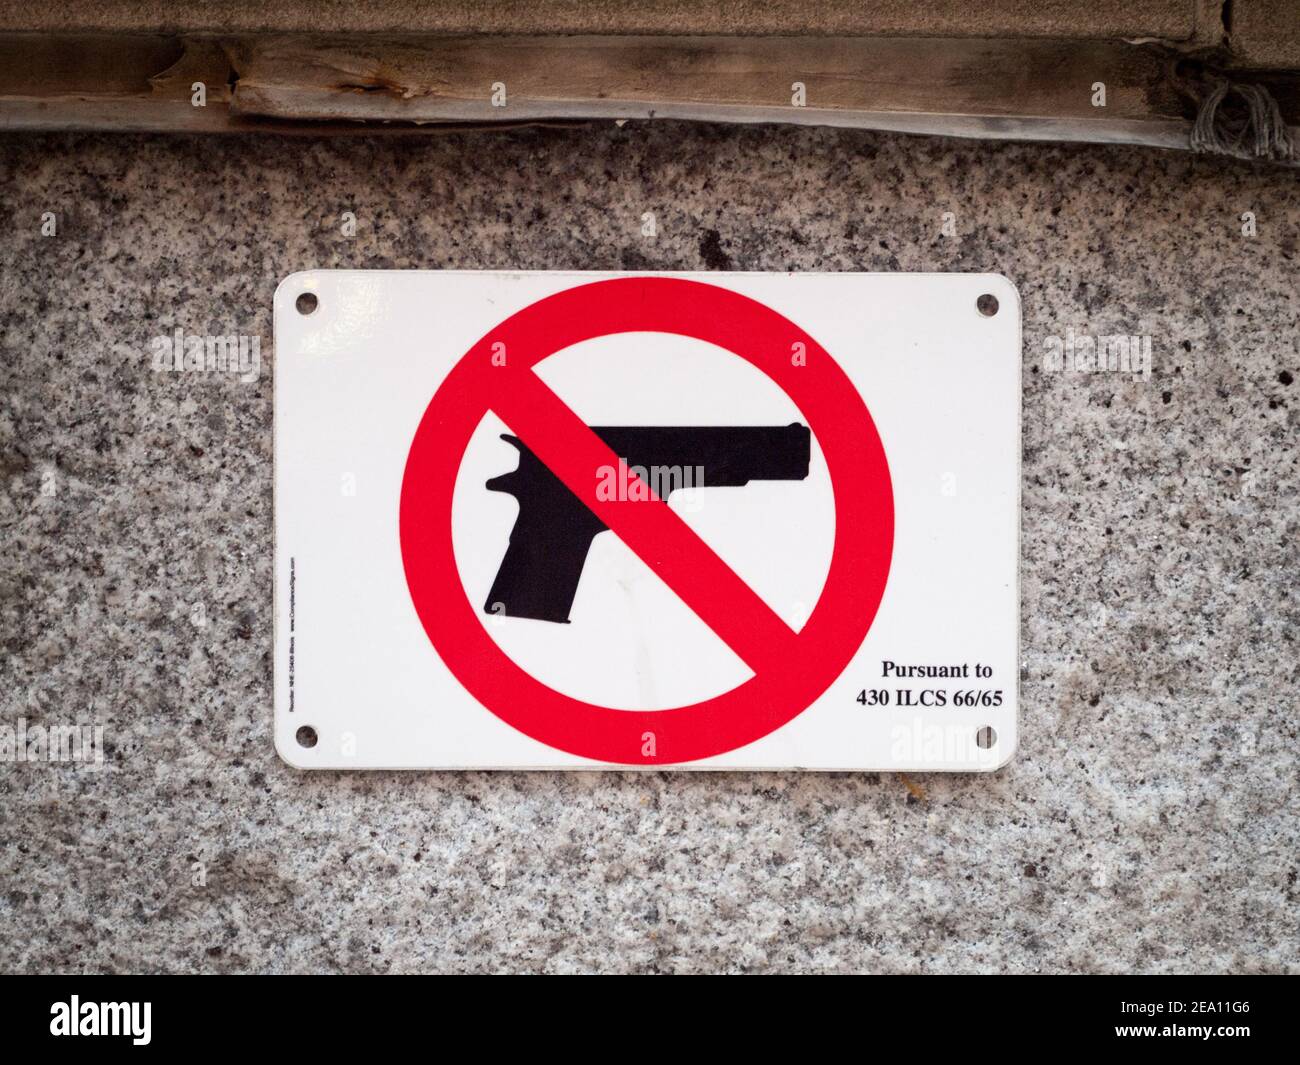 An official Illinois State Policy approved sign prohibiting the carrying of firearms. Chicago, Illinois. (No guns allowed, no firearms, gun control). Stock Photo